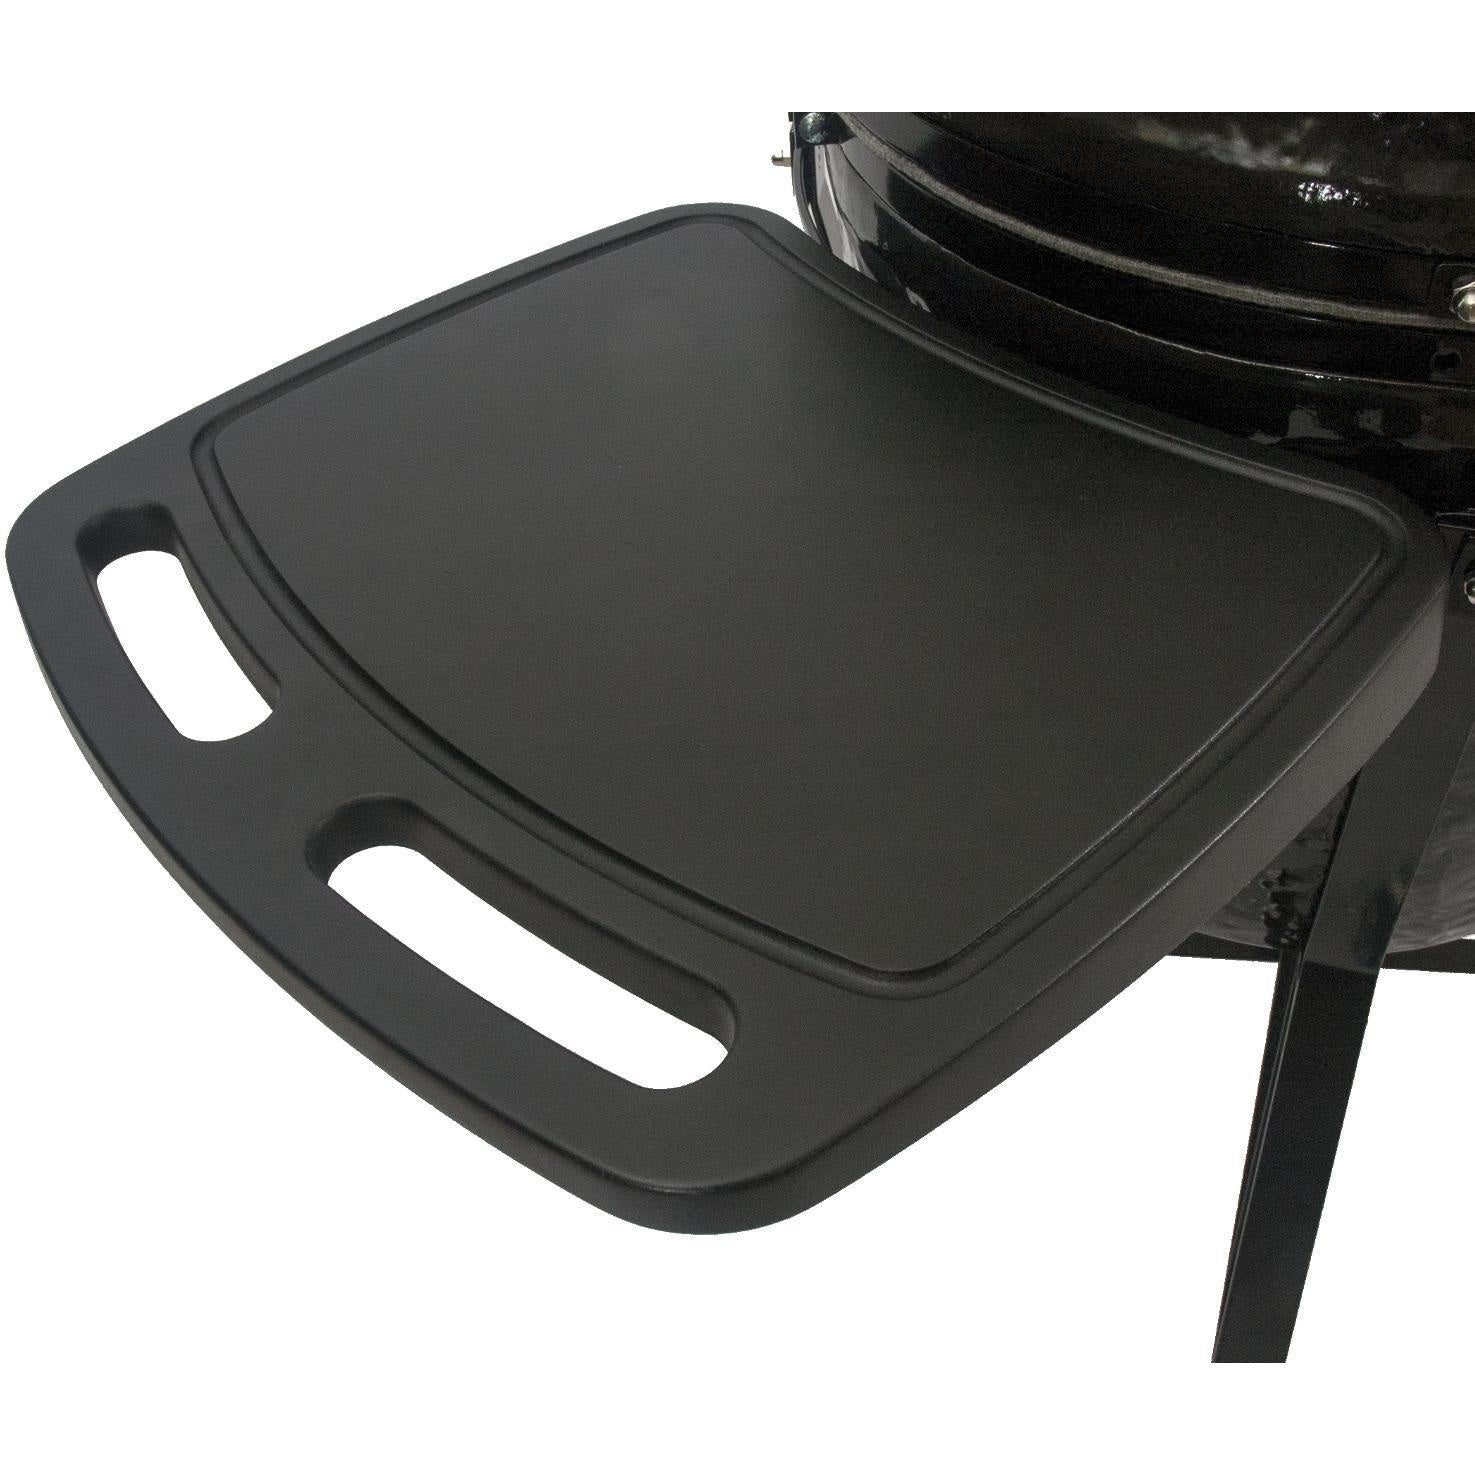 Primo All-In-One Oval XL 400 Ceramic Kamado Grill With Cradle, Side Shelves, And Stainless Steel Grates - PGCXLC